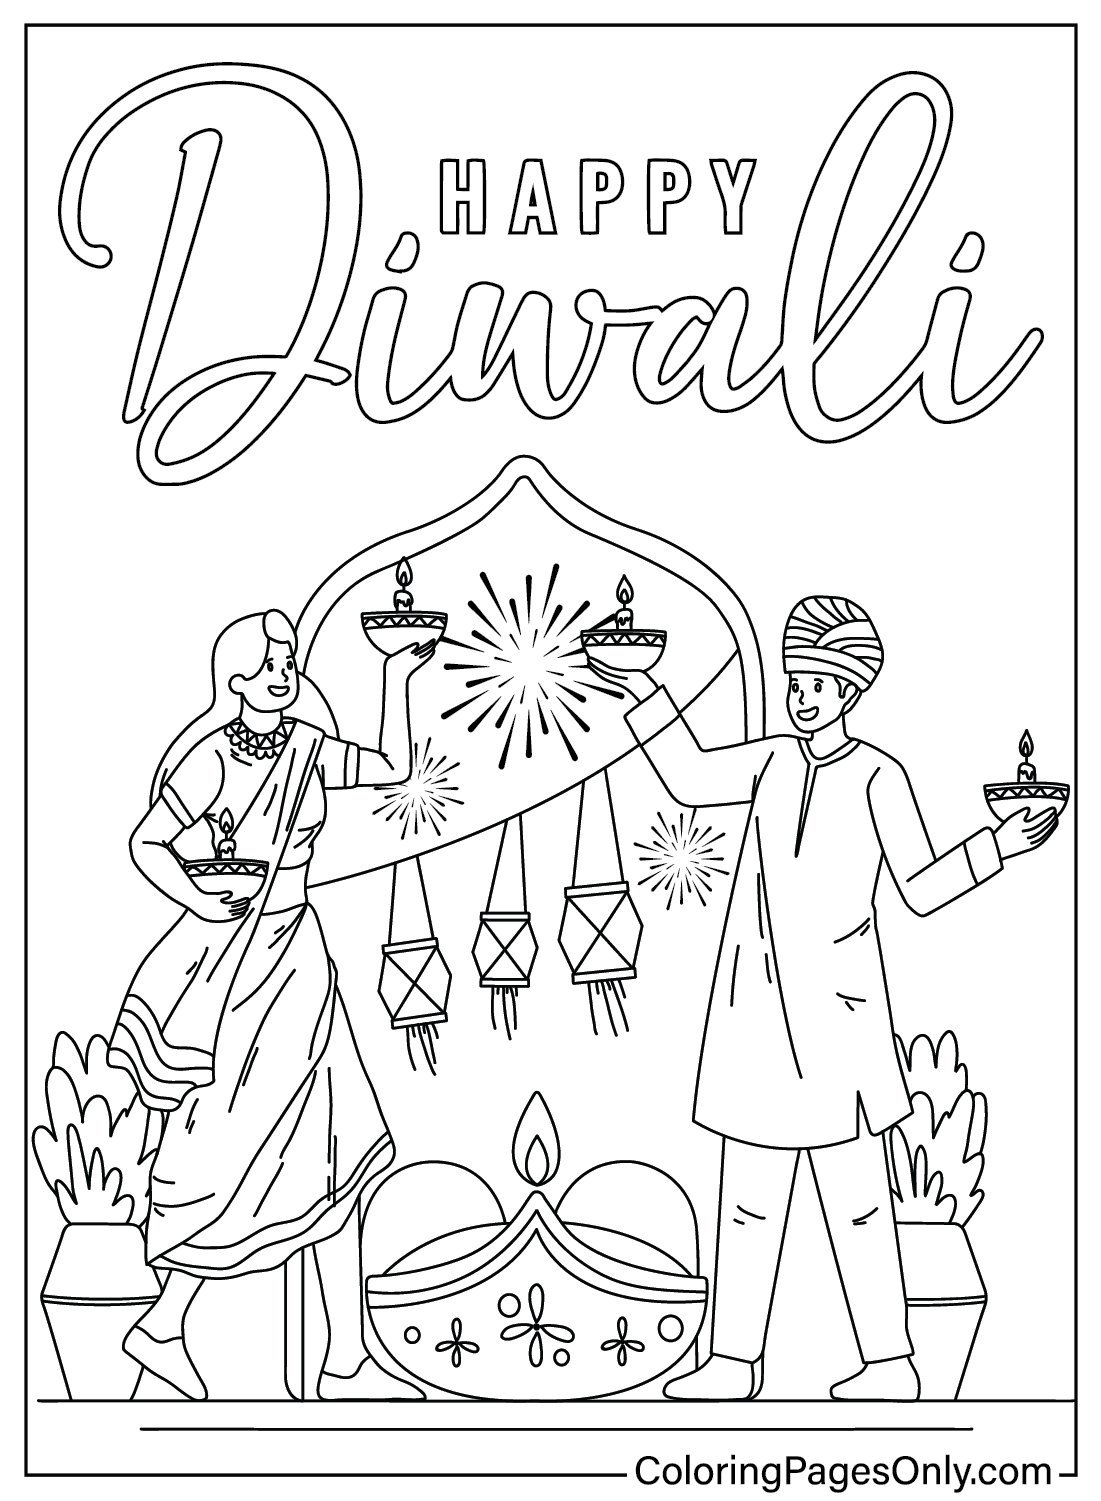 Coloring Page Diwali from Diwali